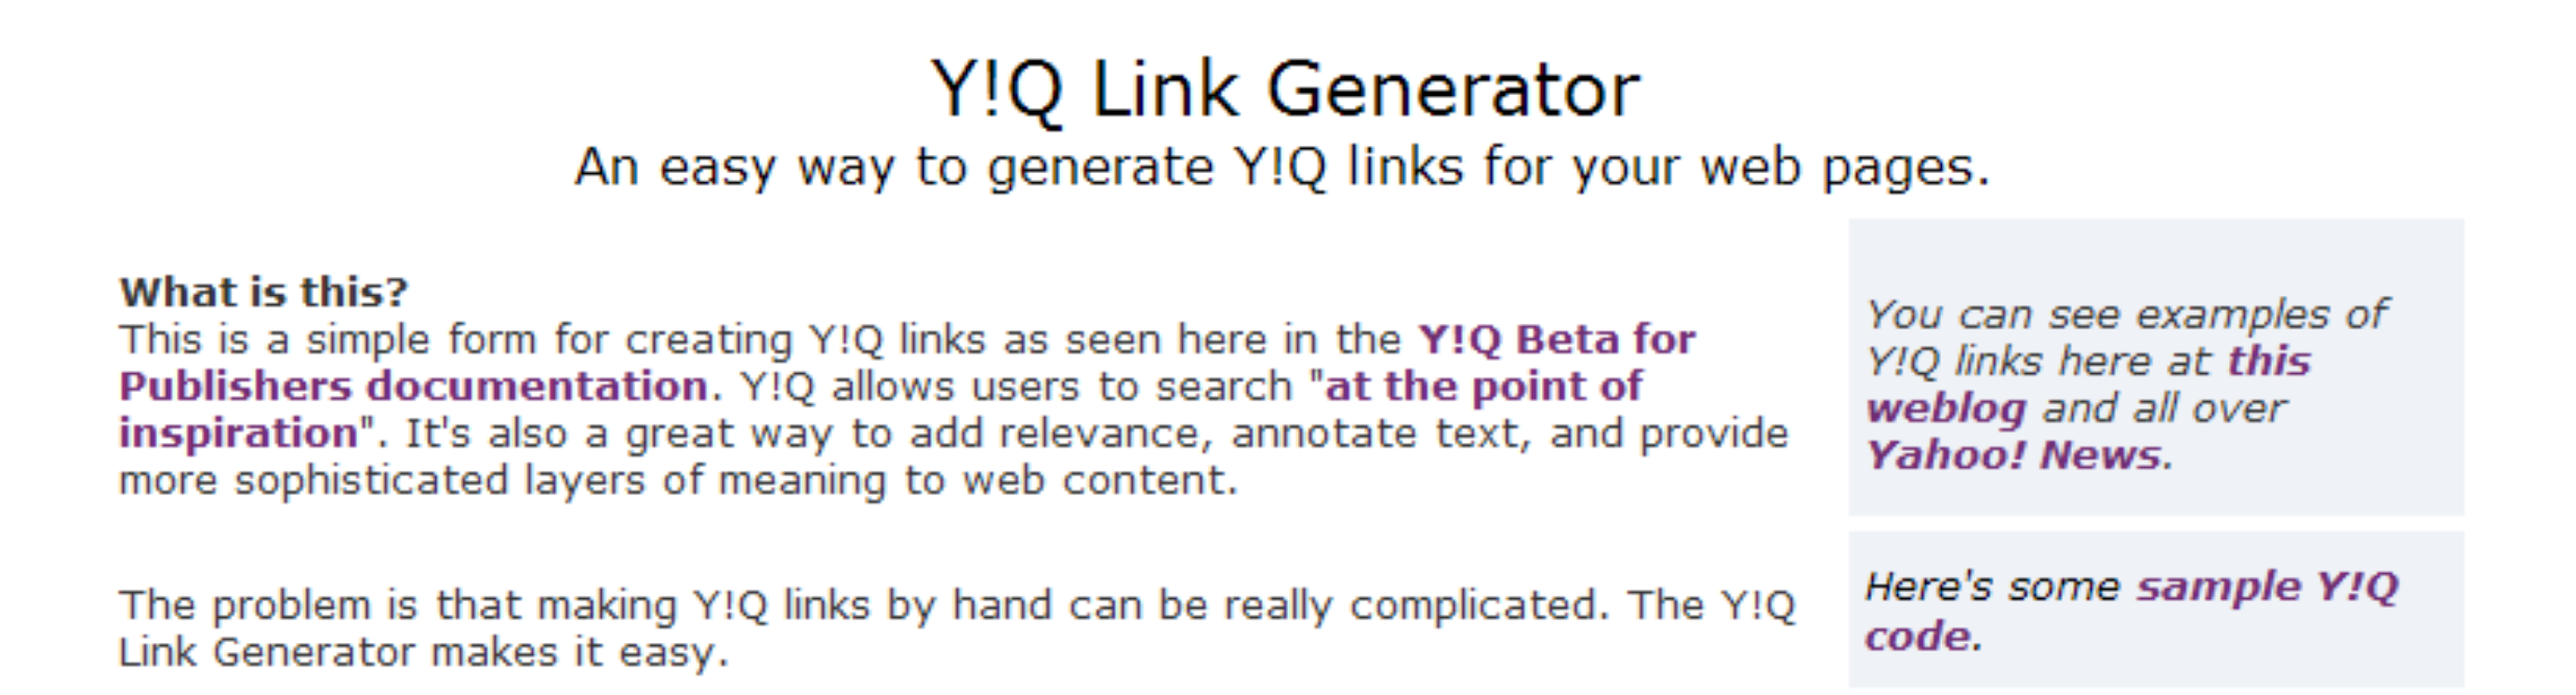 Y!Q for Publishers: More Hyper, Less Link!